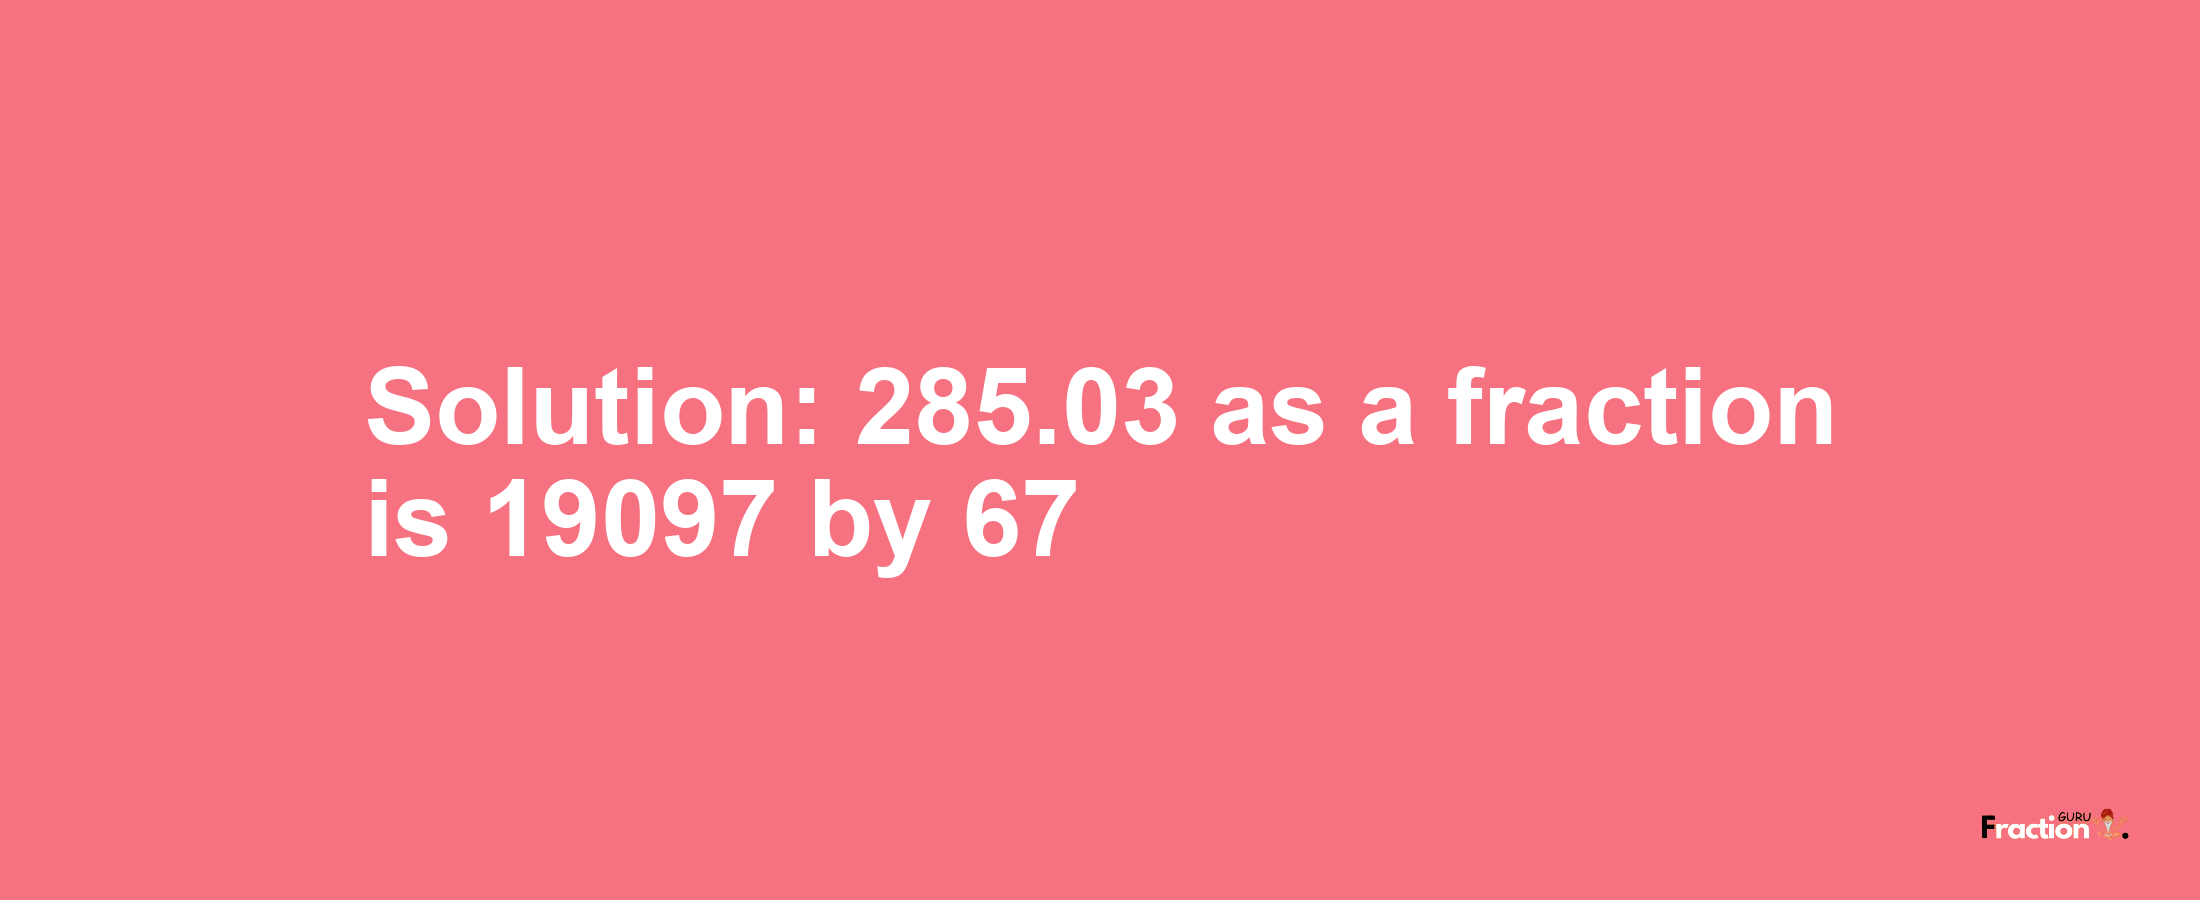 Solution:285.03 as a fraction is 19097/67